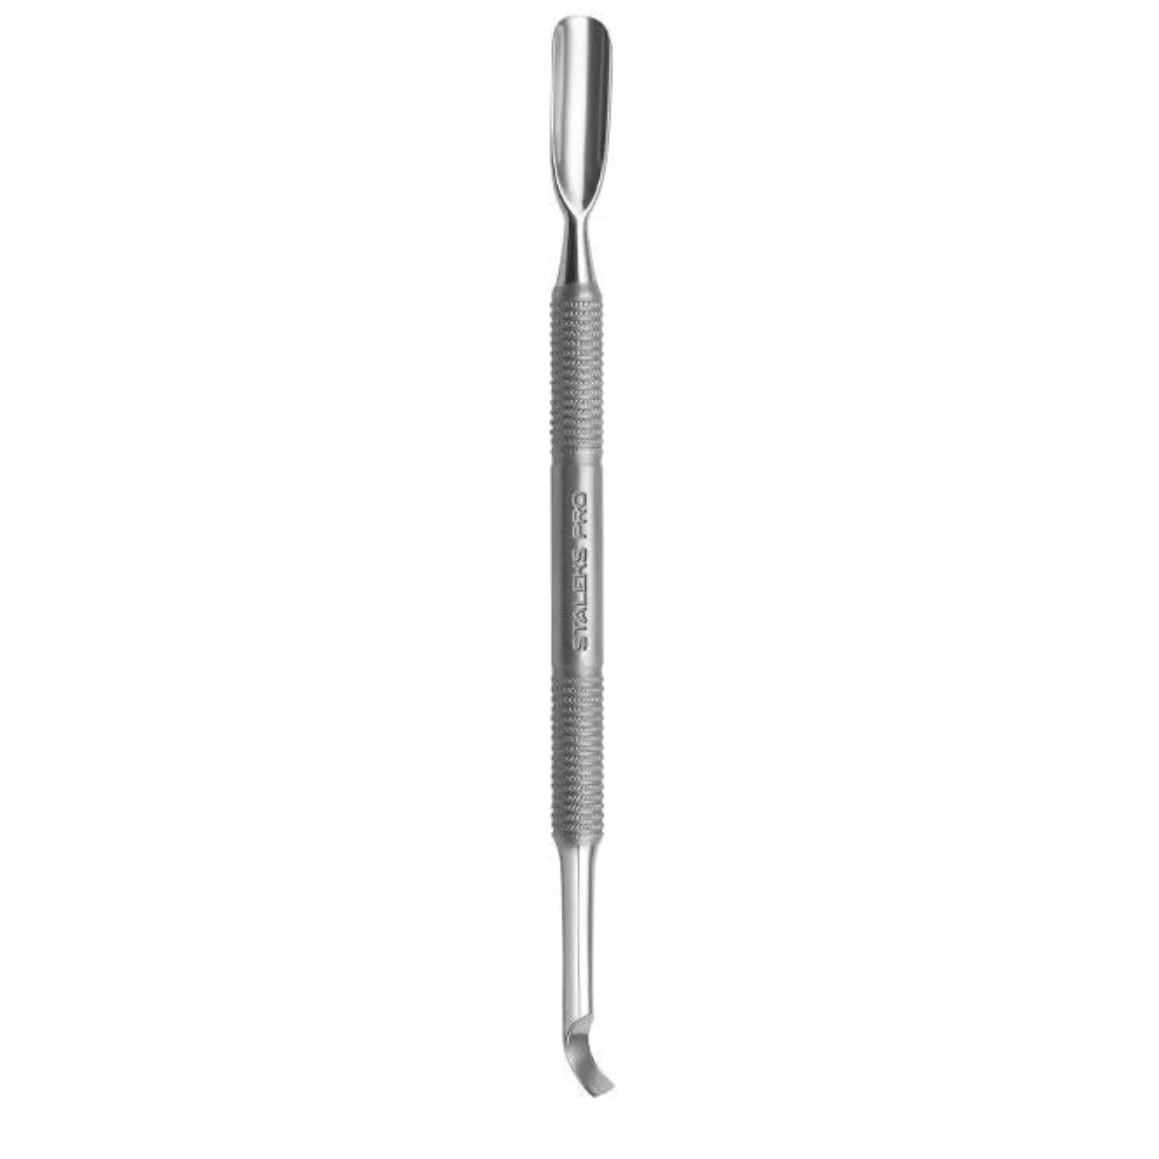 STALEKS PRO Cuticle Pusher, EXPERT 30/4.2 (Rounded Pusher and Bent Blade)